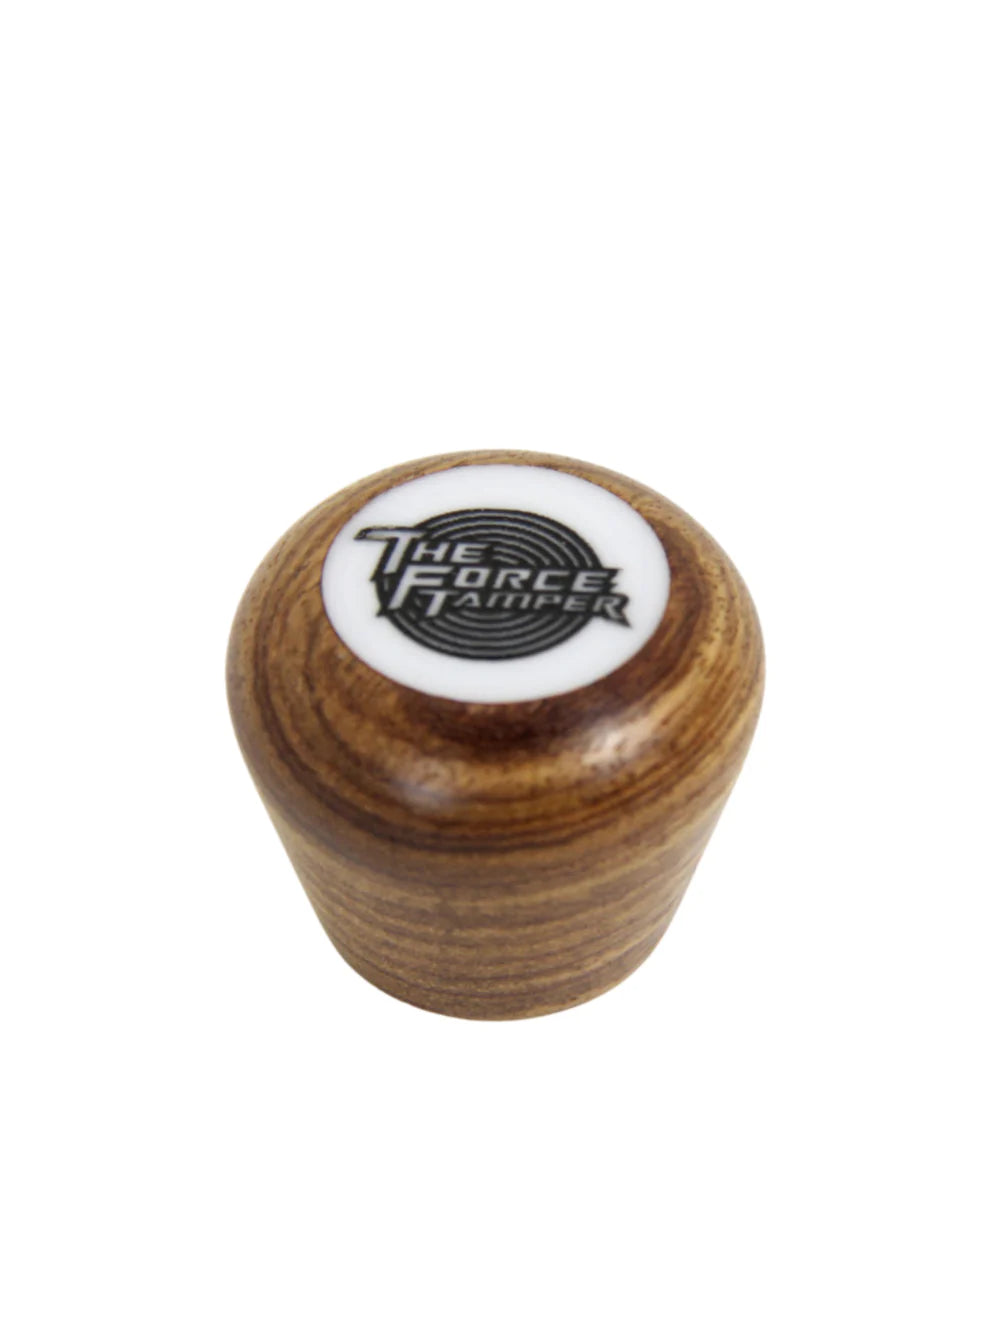 The Force Tamper - Replacement Handle